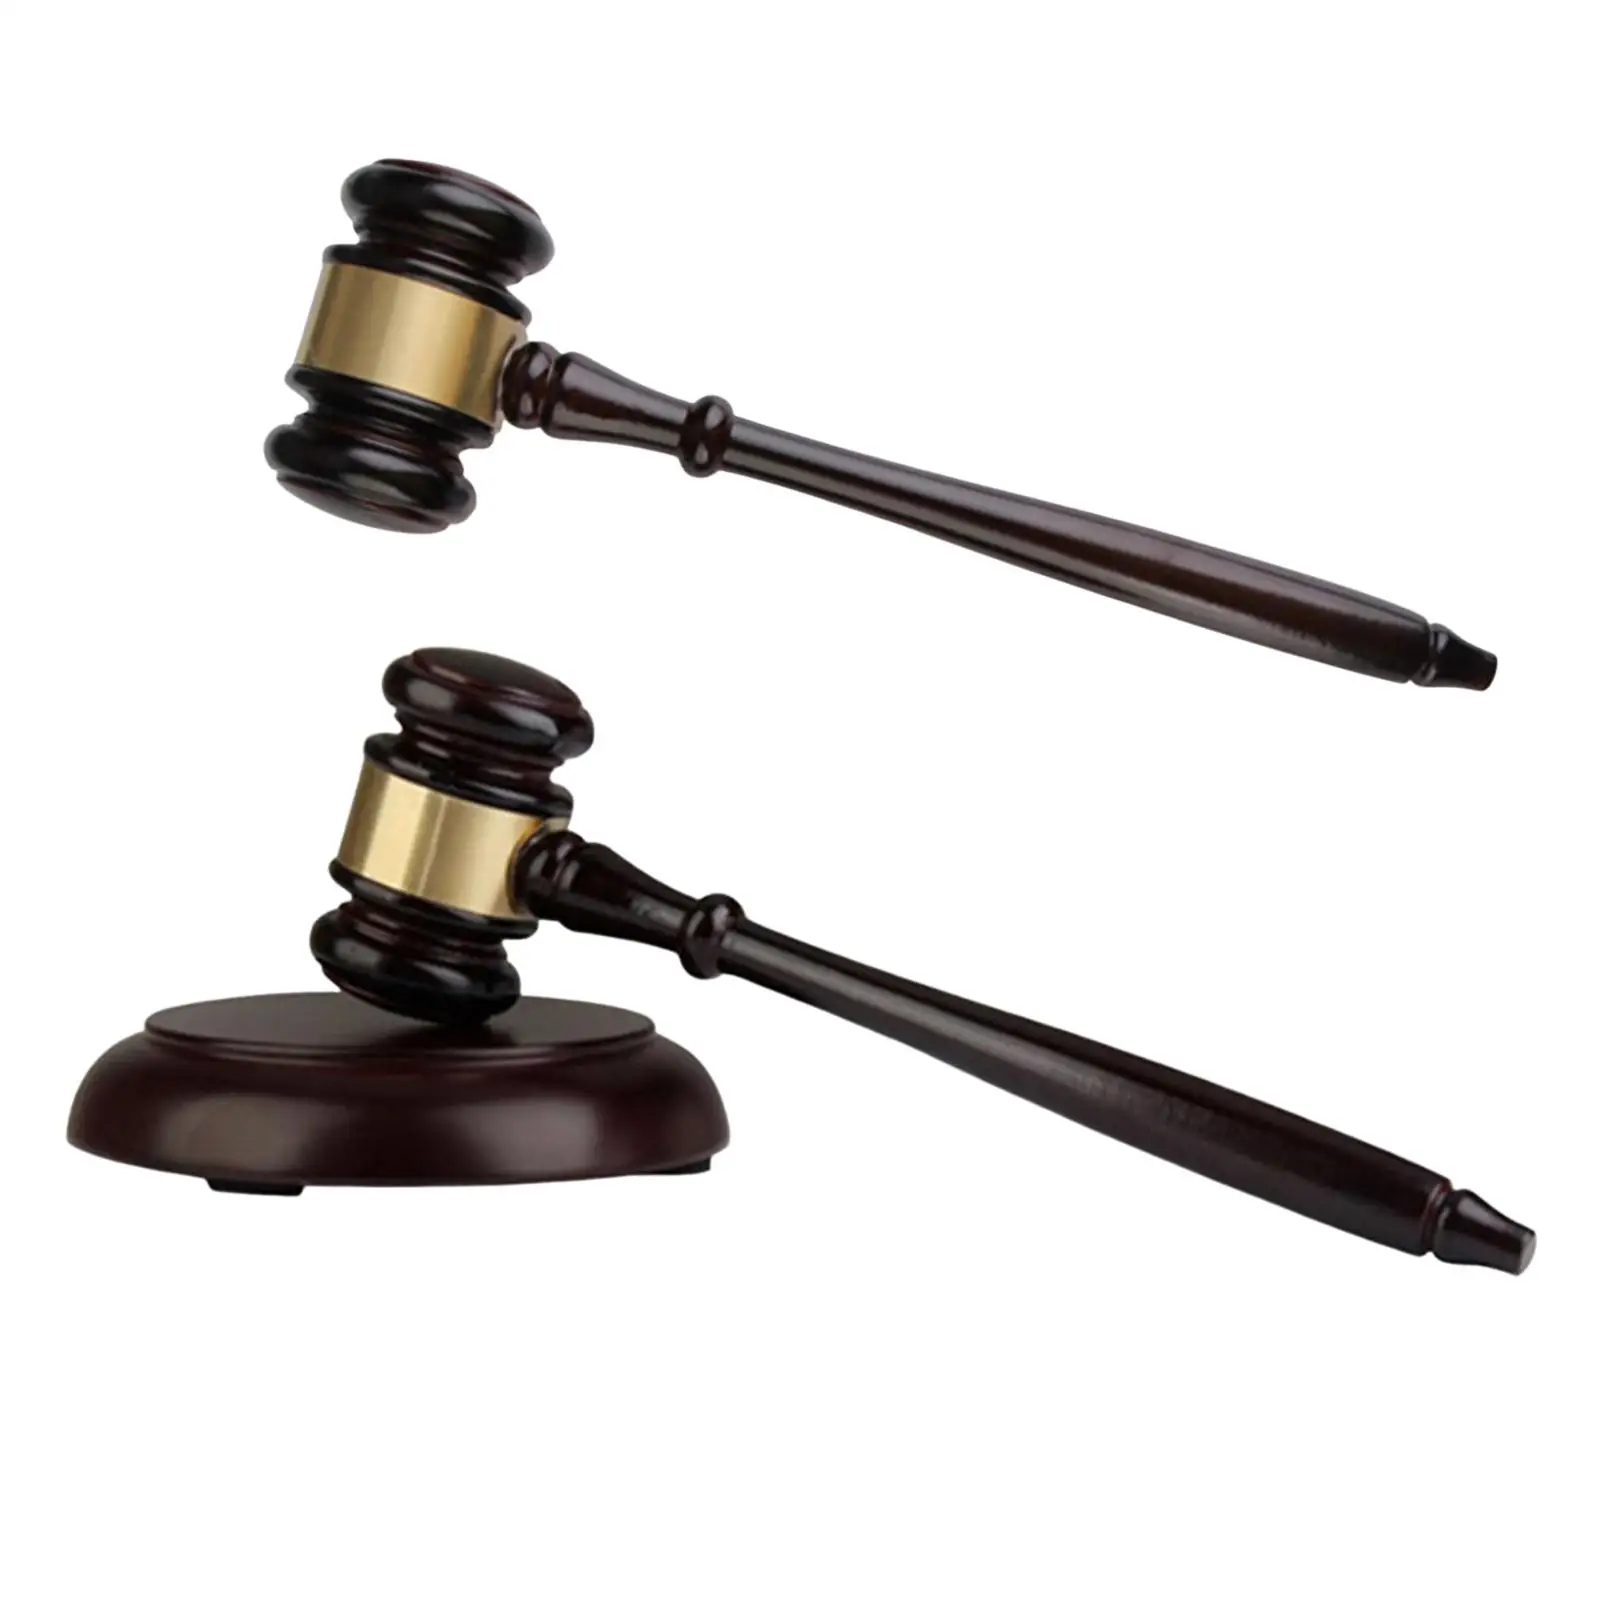 Handmade Mini Mallet Unique Craft Gifts Toys Costume Accessory Cosplay Props Wood Gavel Toy for Judge Justice Auction Lawyer